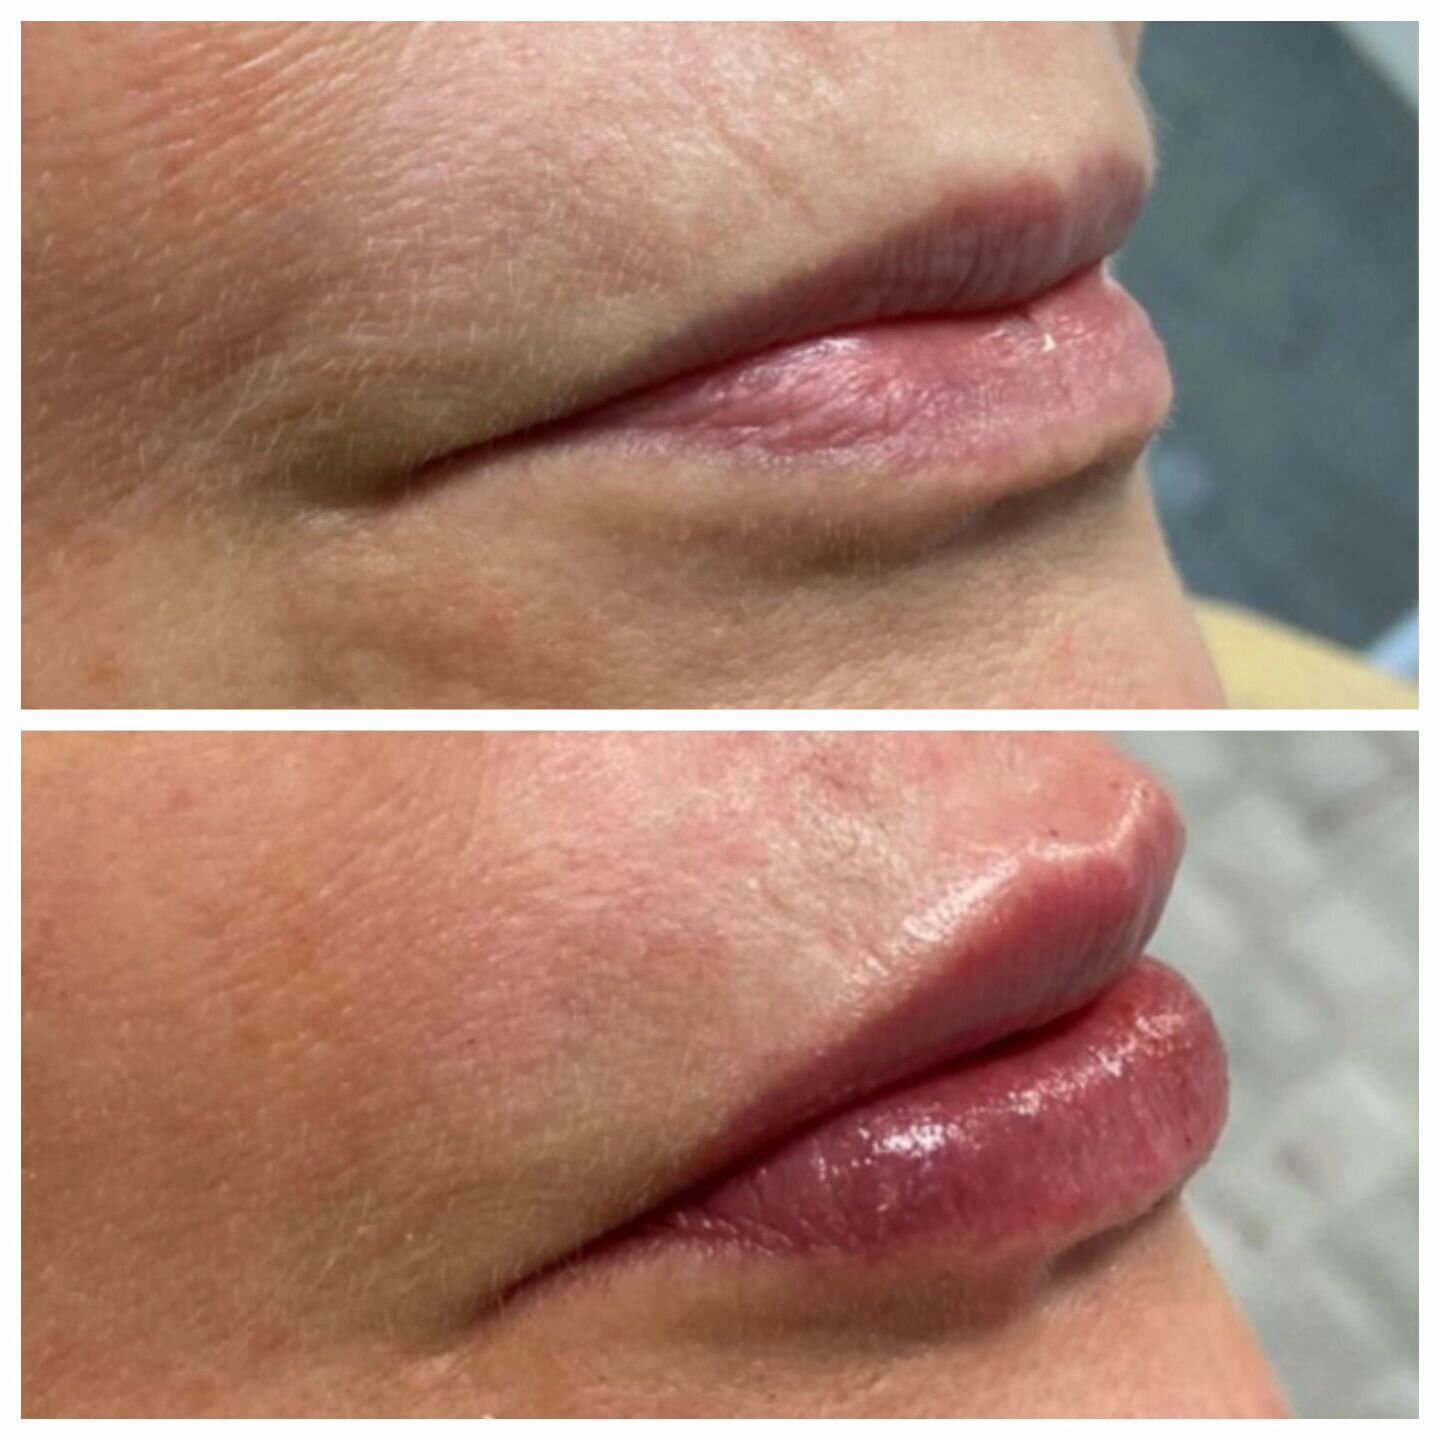 Transform your lips this Valentine's Day!💞 
Aging can make our lips thinner and lose their shape🫦

Consider a conservative dose of Hyaluronic Acid filler for plump, hydrated, and beautifully shaped lips💉💋

Avoid alcohol, especially red wine, befo